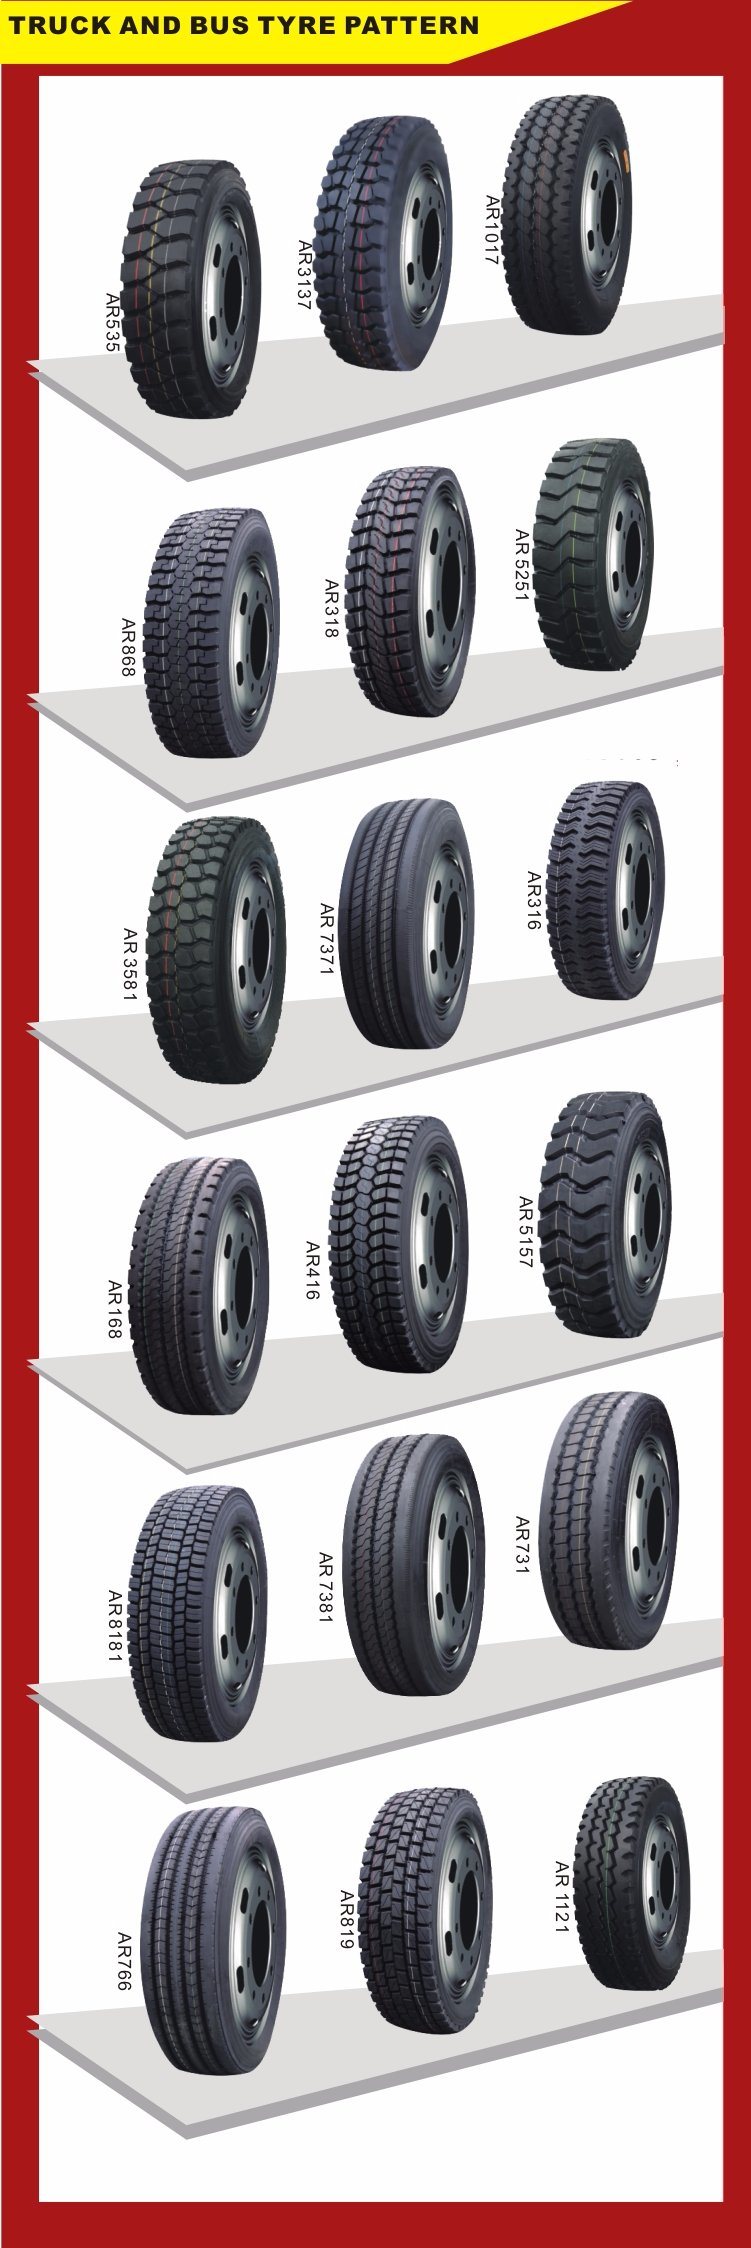 11.00r20 Updated TBR Tyre Especially for Overloading Road Condition